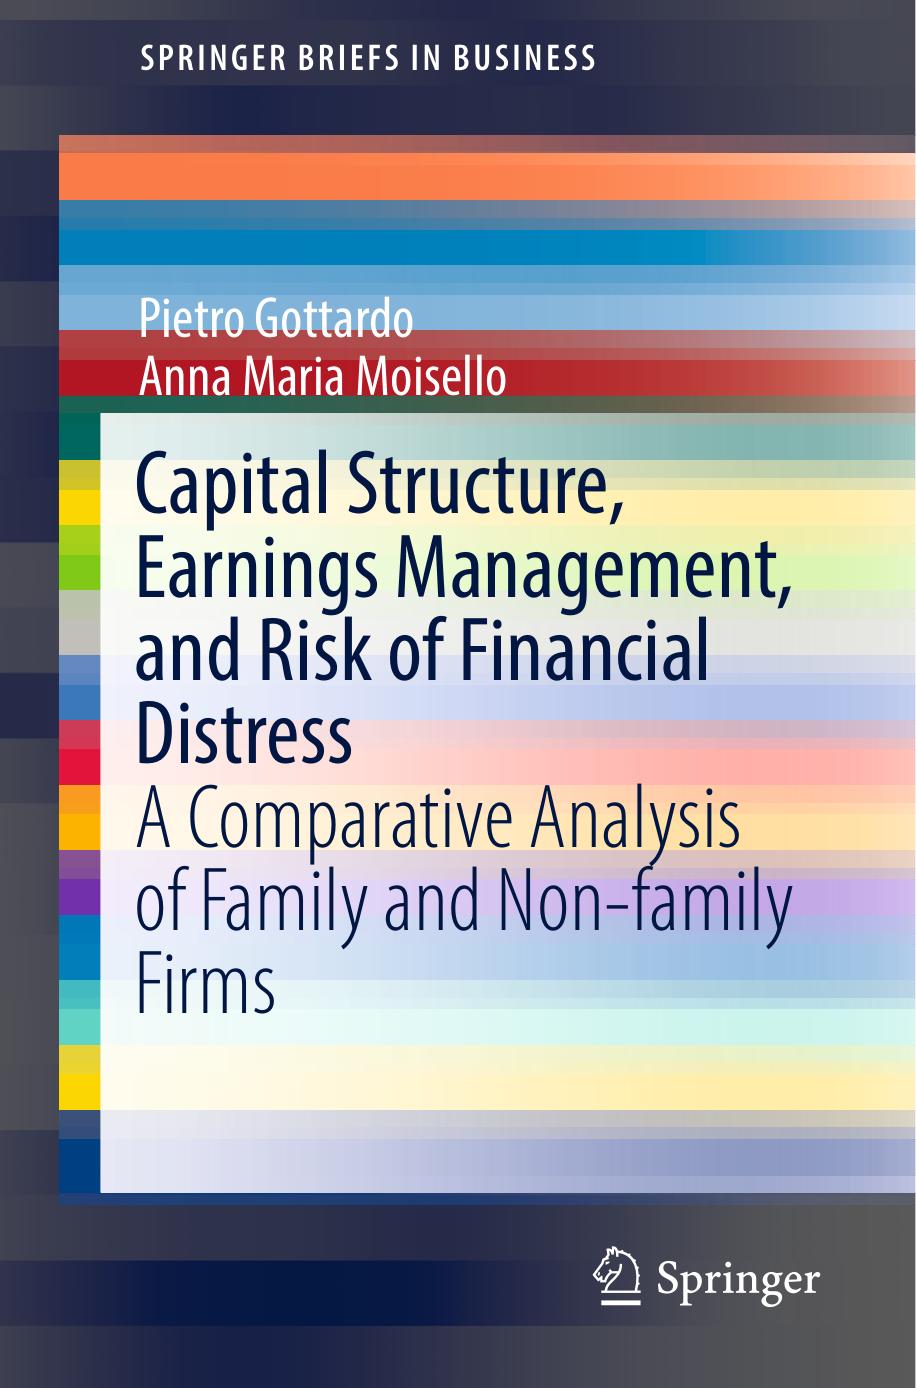 Capital Structure, Earnings Management, and Risk of Financial Distress 2019